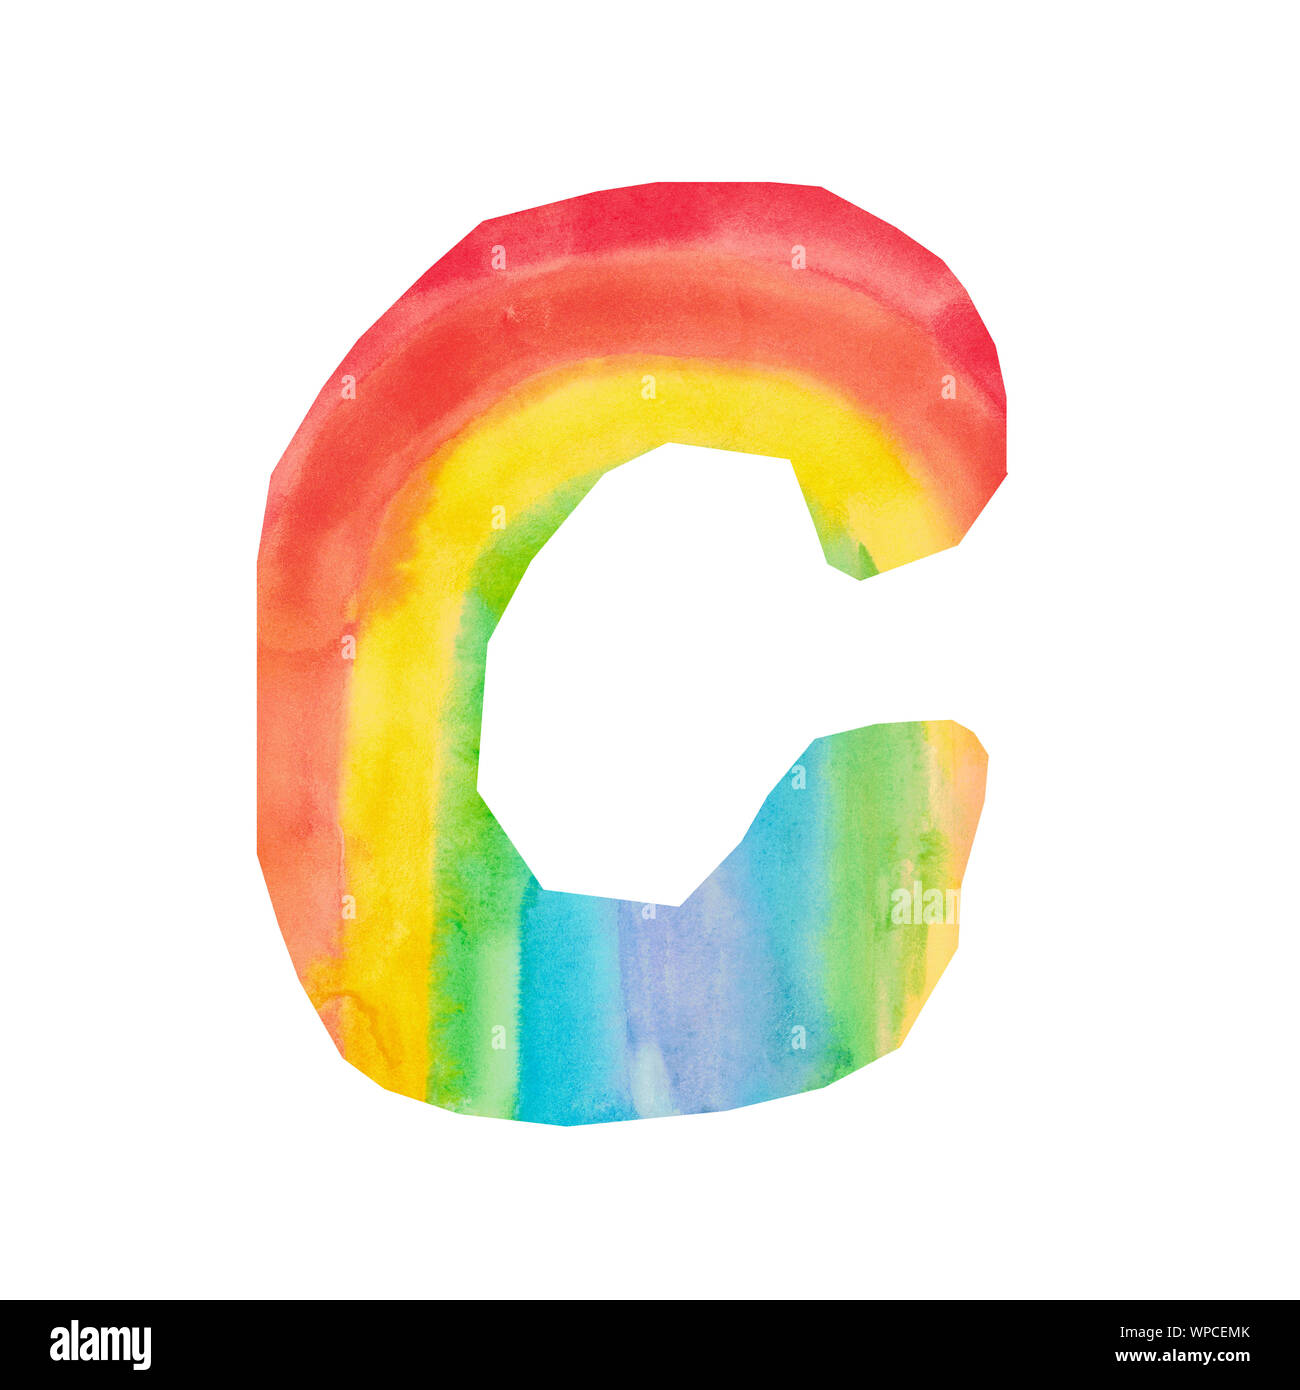 Watercolor illustration of a decorative Element of the letter C of the alphabet. Kids design texture rainbow Stock Photo